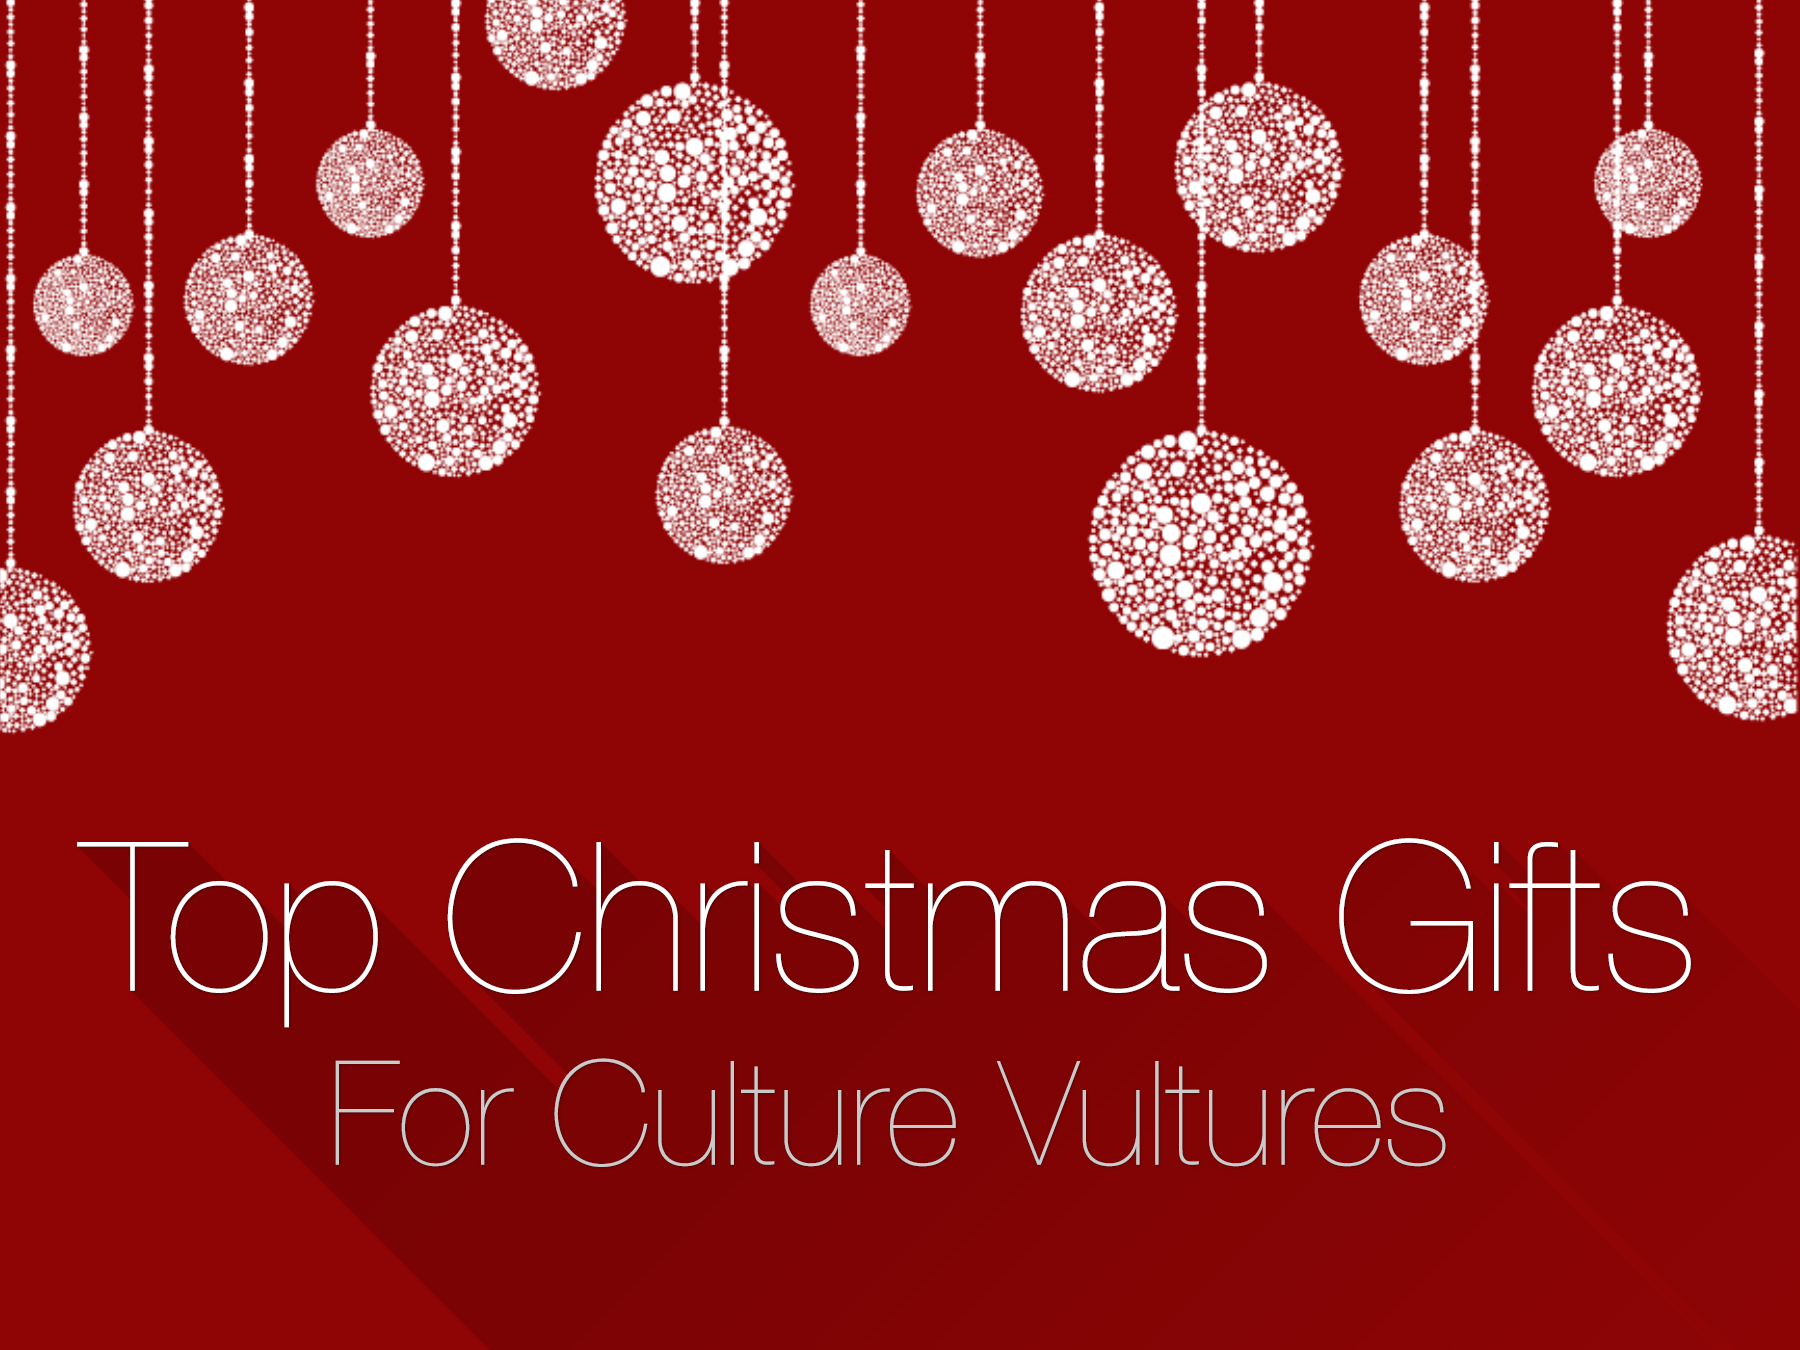 Top Christmas Gifts For Culture Vultures